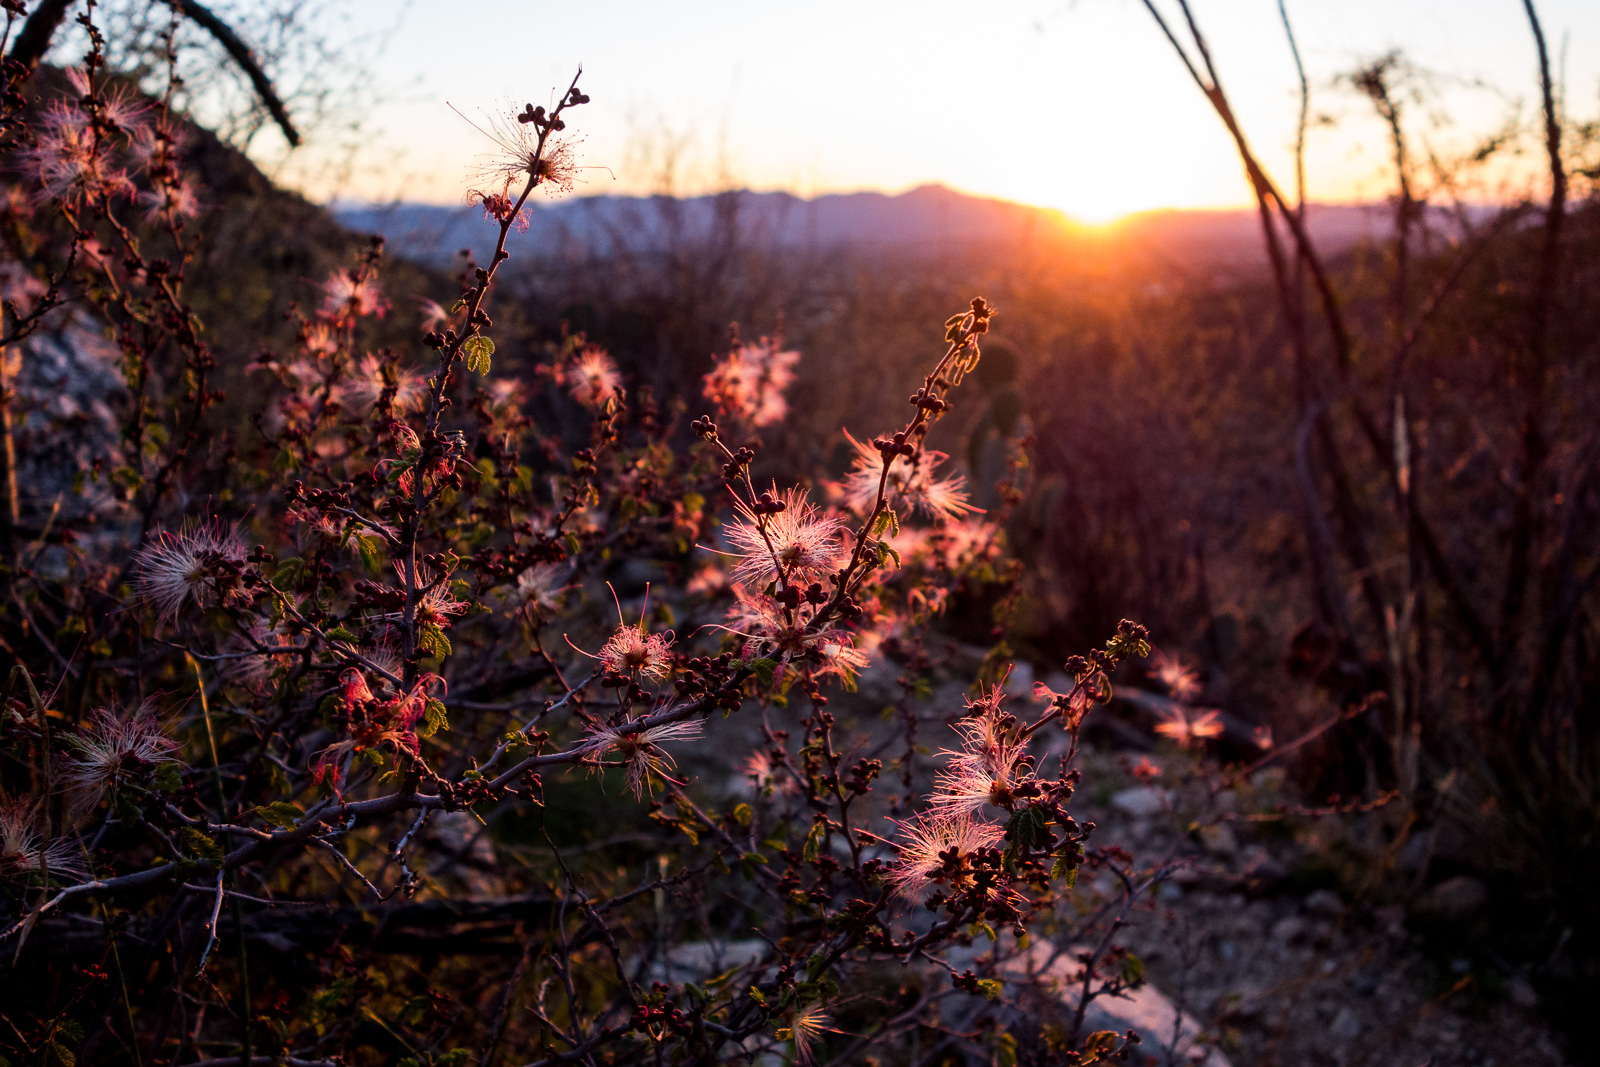 Fairy Dusters and sunset on the Pontatoc Canyon Trail. February 2017.